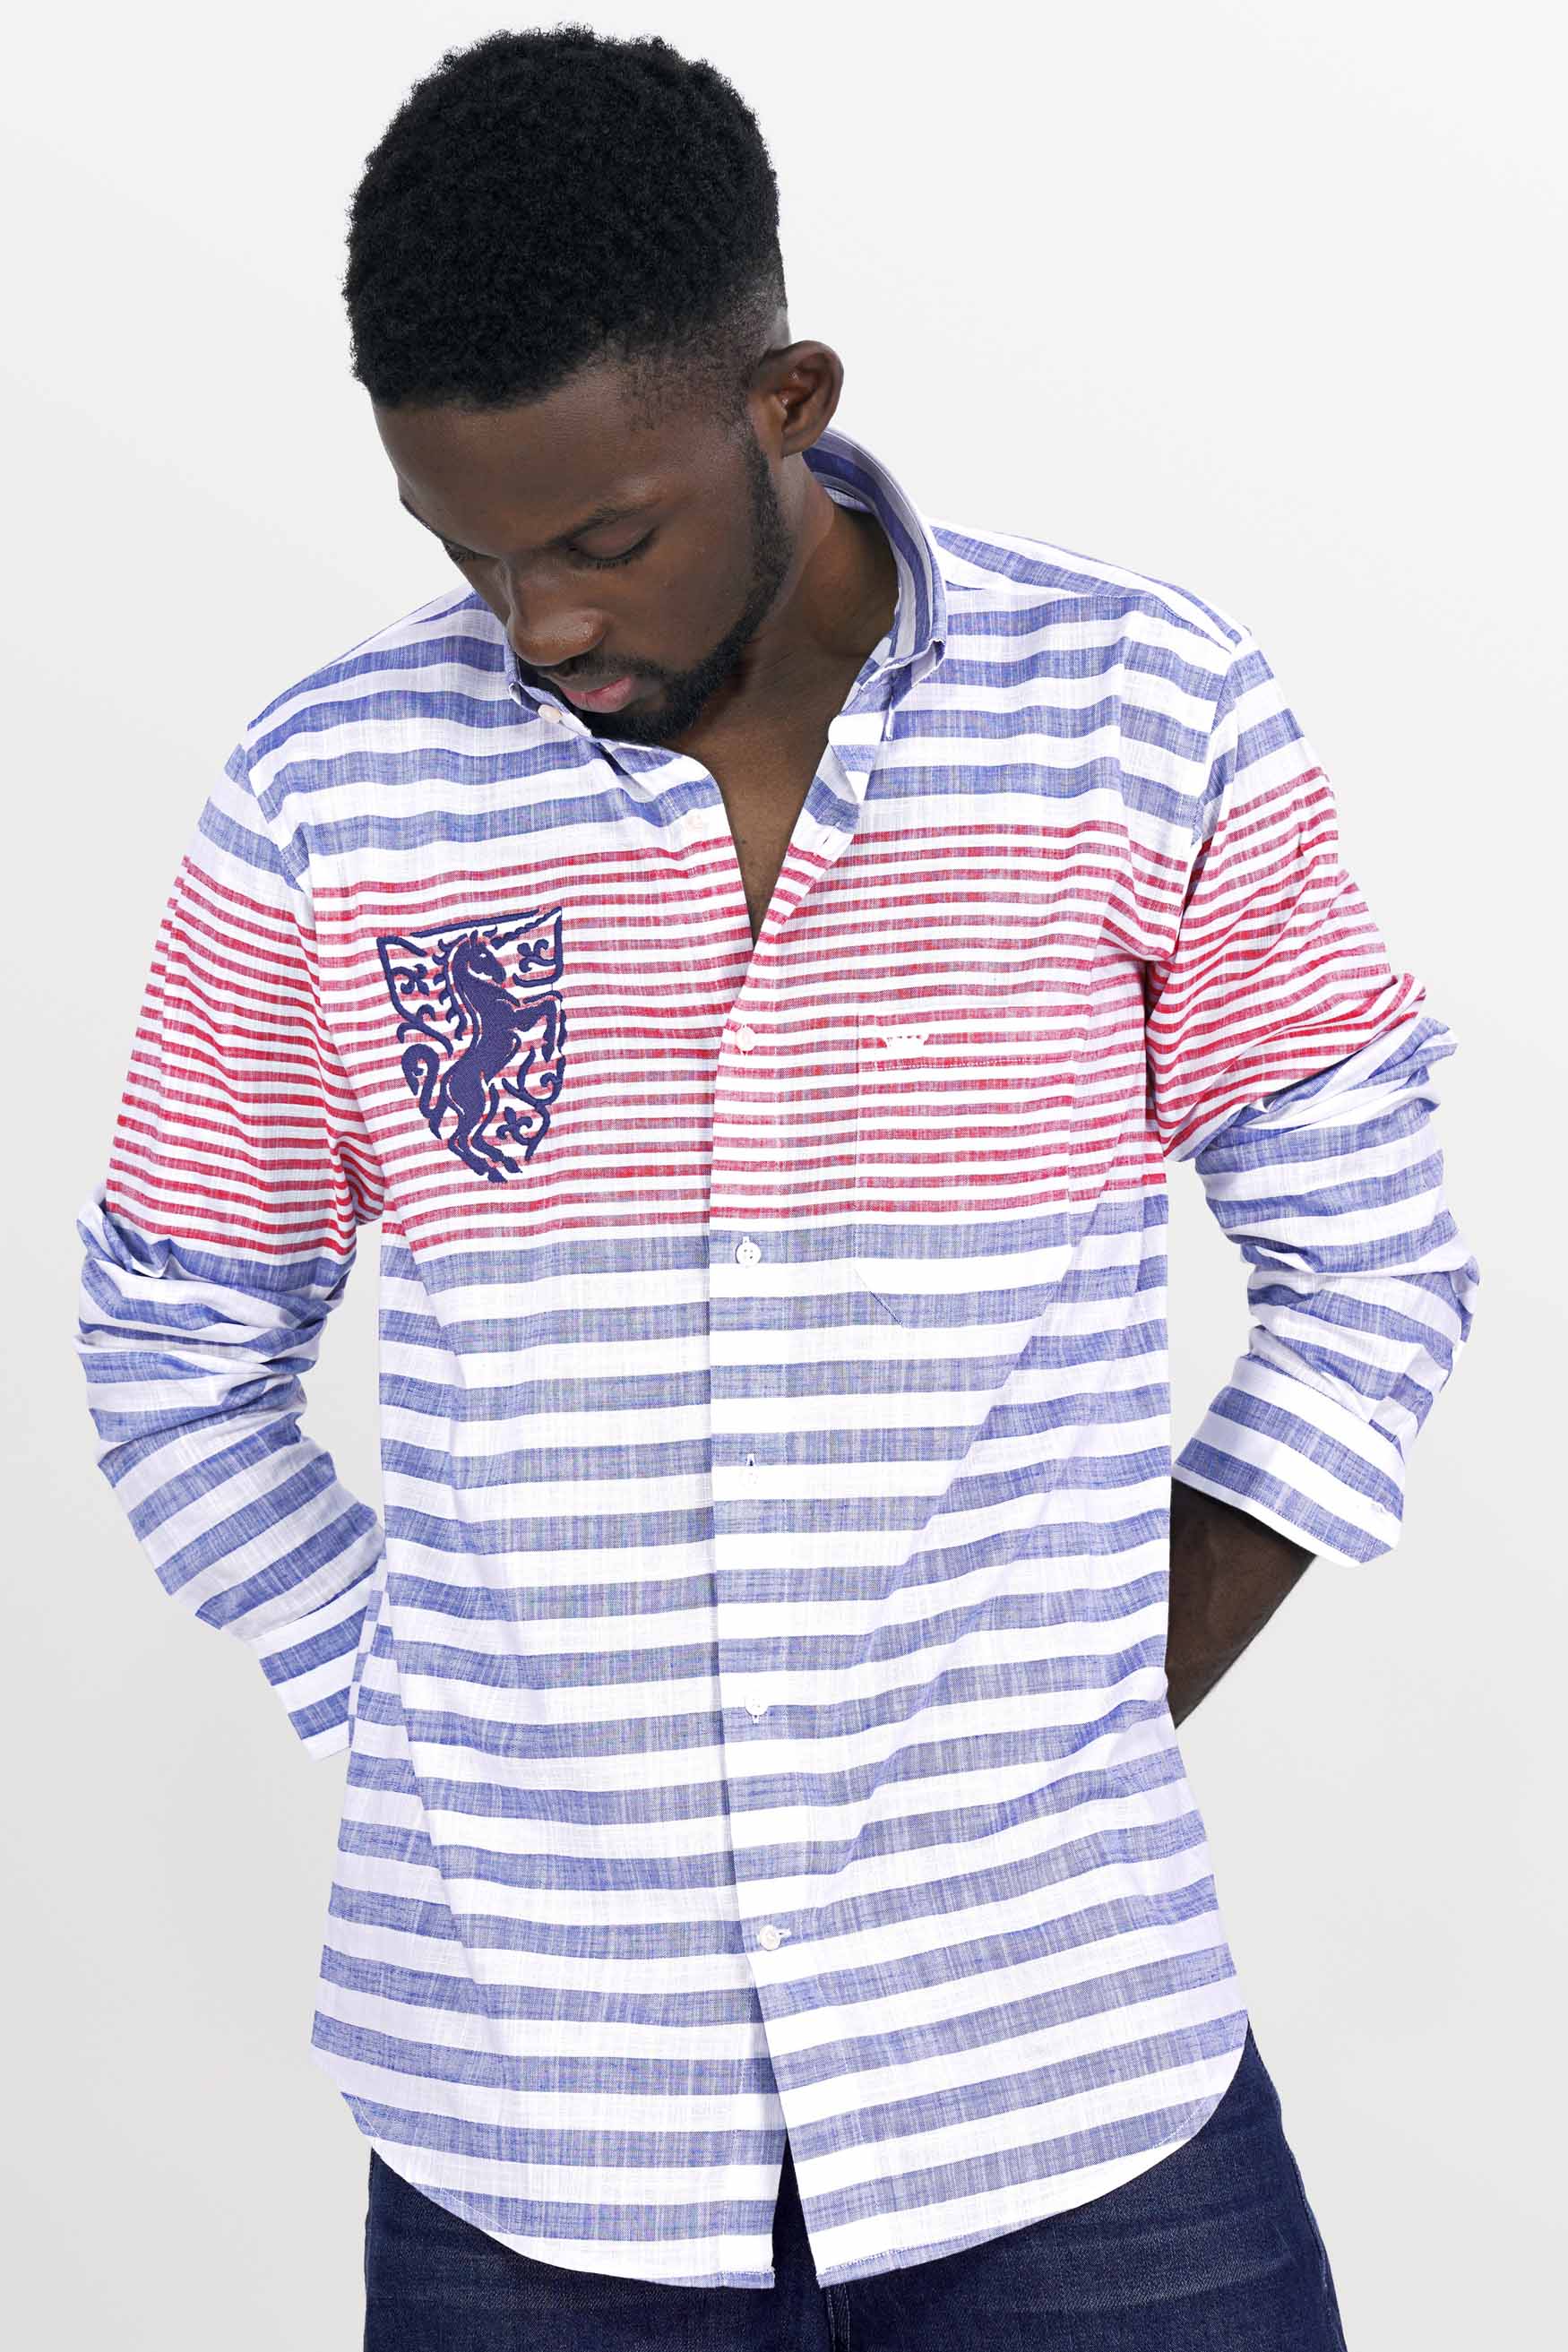 Lynch Blue with Reddish and Bright White Striped Funky Patchwork Luxurious Linen Designer Shirt 6165-BD-E178-38, 6165-BD-E178-H-38, 6165-BD-E178-39, 6165-BD-E178-H-39, 6165-BD-E178-40, 6165-BD-E178-H-40, 6165-BD-E178-42, 6165-BD-E178-H-42, 6165-BD-E178-44, 6165-BD-E178-H-44, 6165-BD-E178-46, 6165-BD-E178-H-46, 6165-BD-E178-48, 6165-BD-E178-H-48, 6165-BD-E178-50, 6165-BD-E178-H-50, 6165-BD-E178-52, 6165-BD-E178-H-52